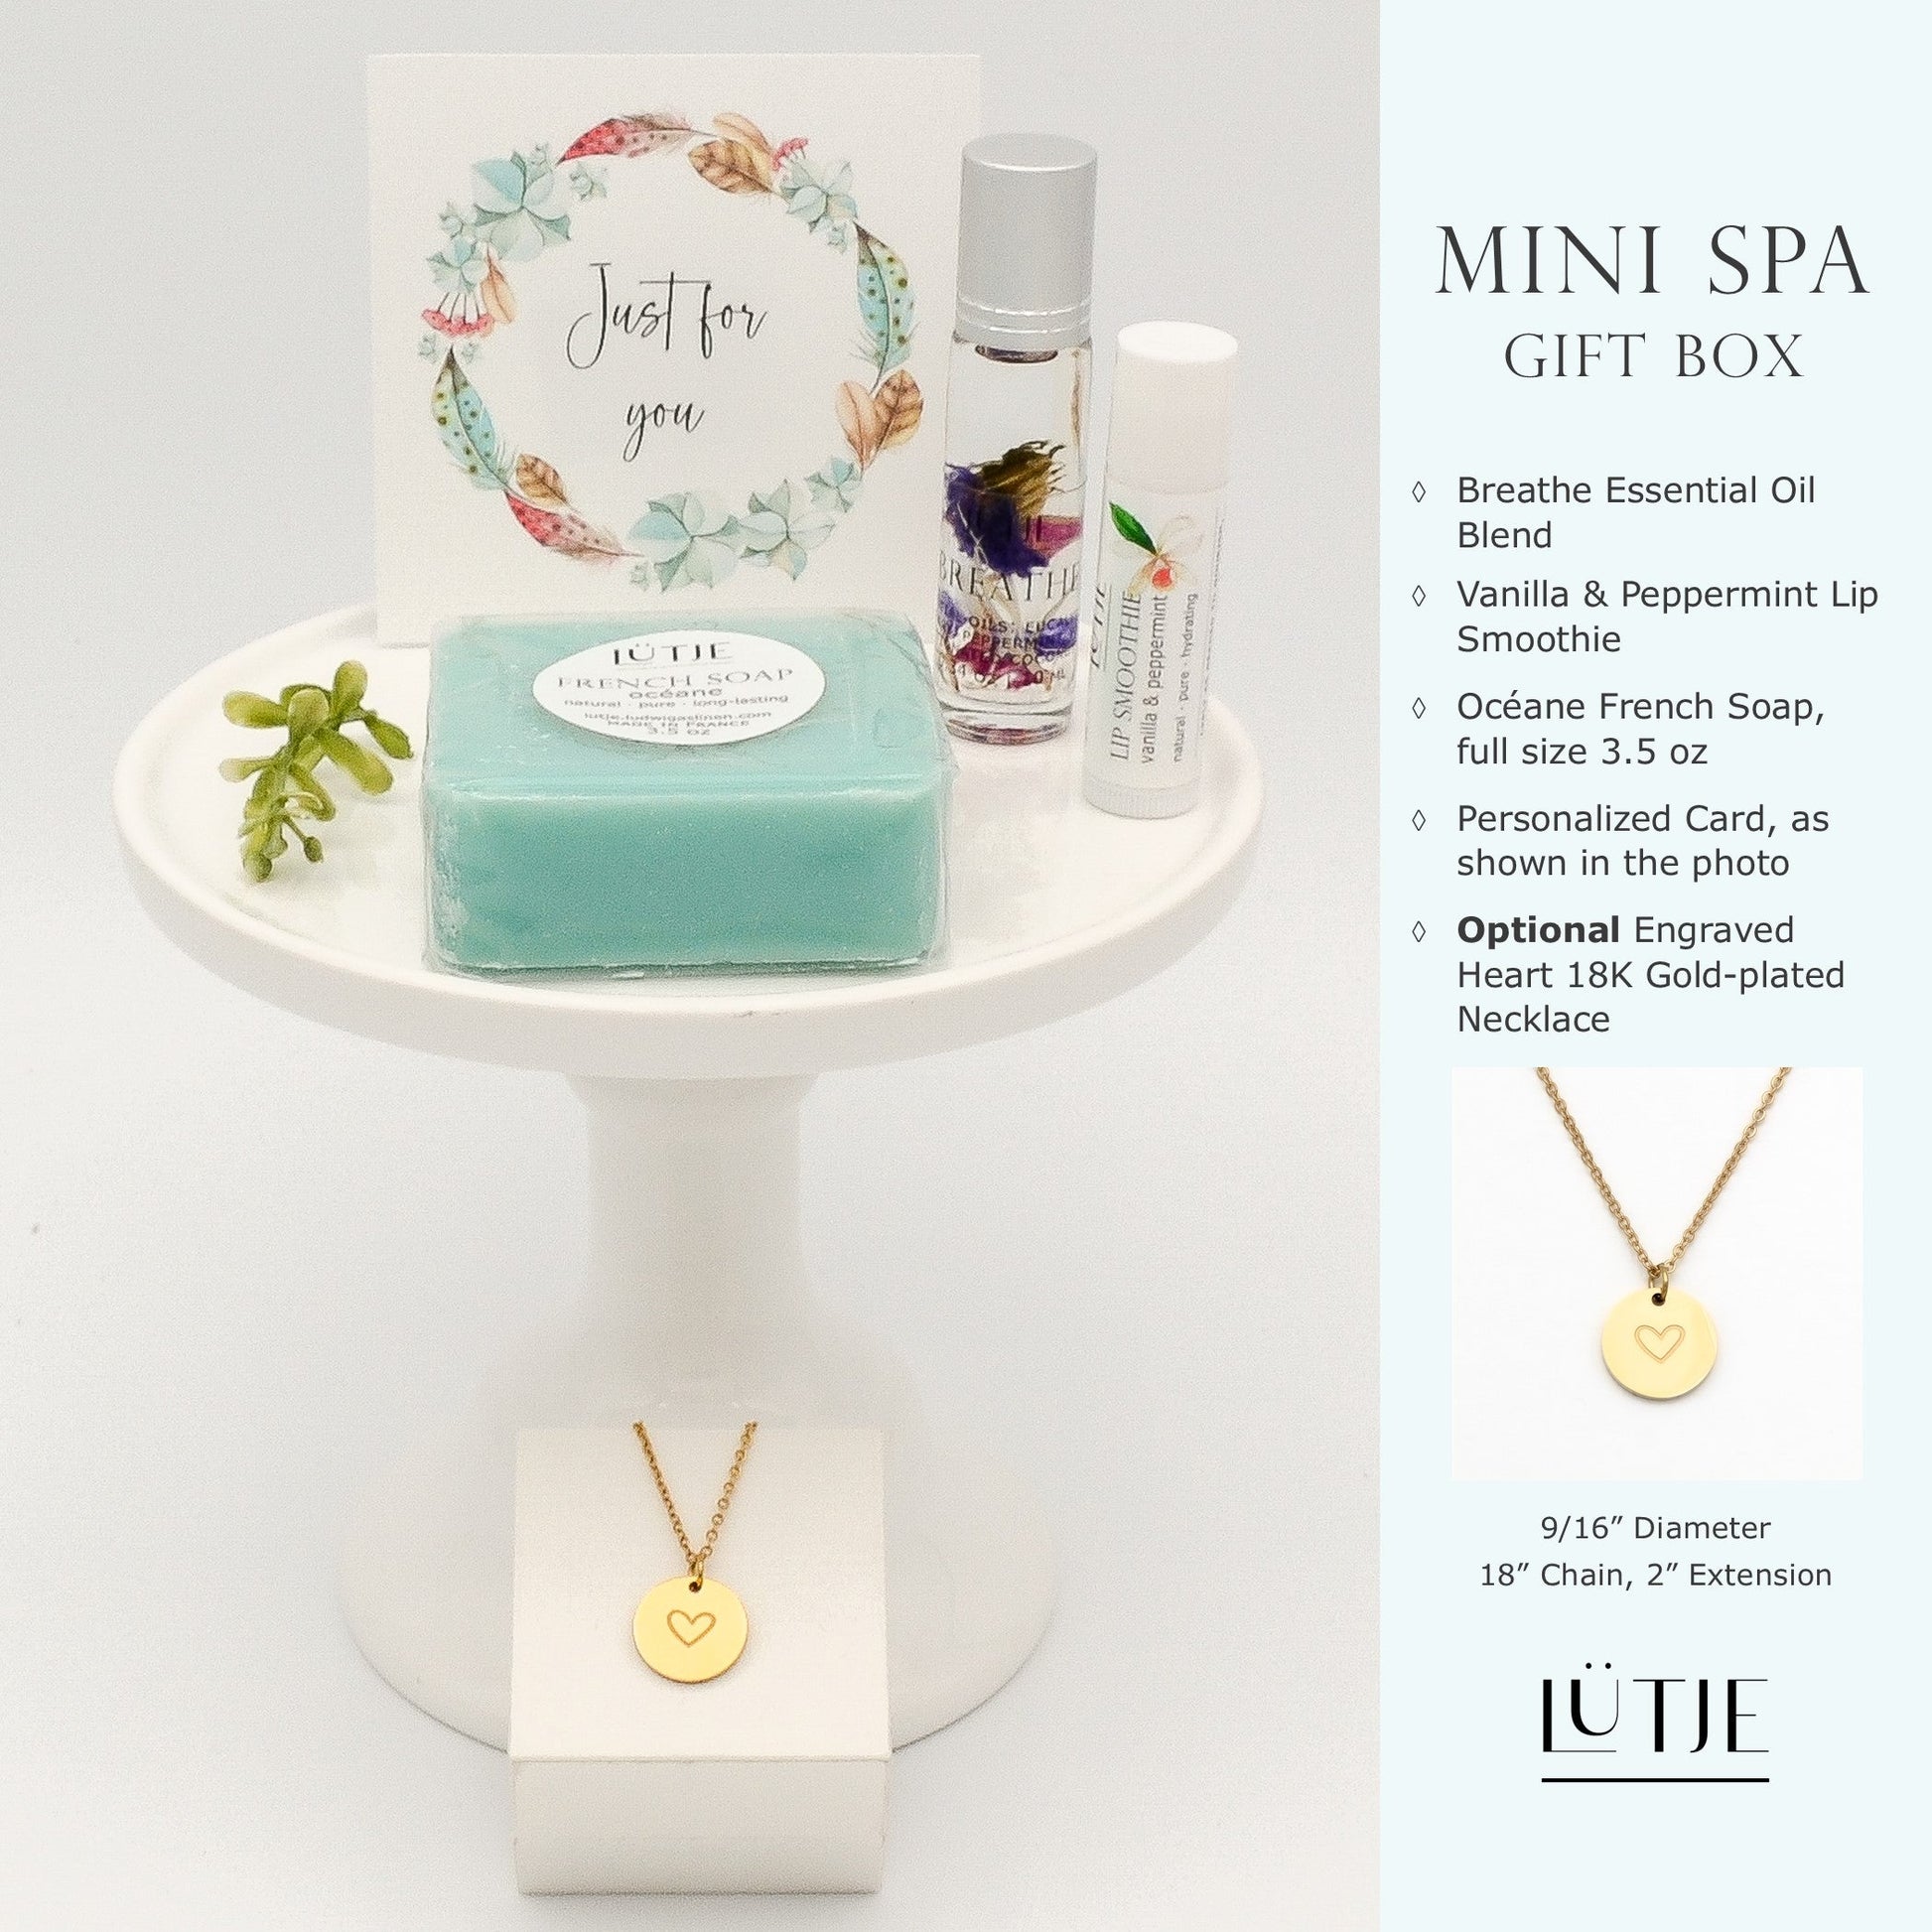 Mini Spa Gift Box for women, sister, daughter, mom, BFF, wife or grandma, includes essential oil, French soap, lip balm, and 18K gold-plated necklace with engraved heart.